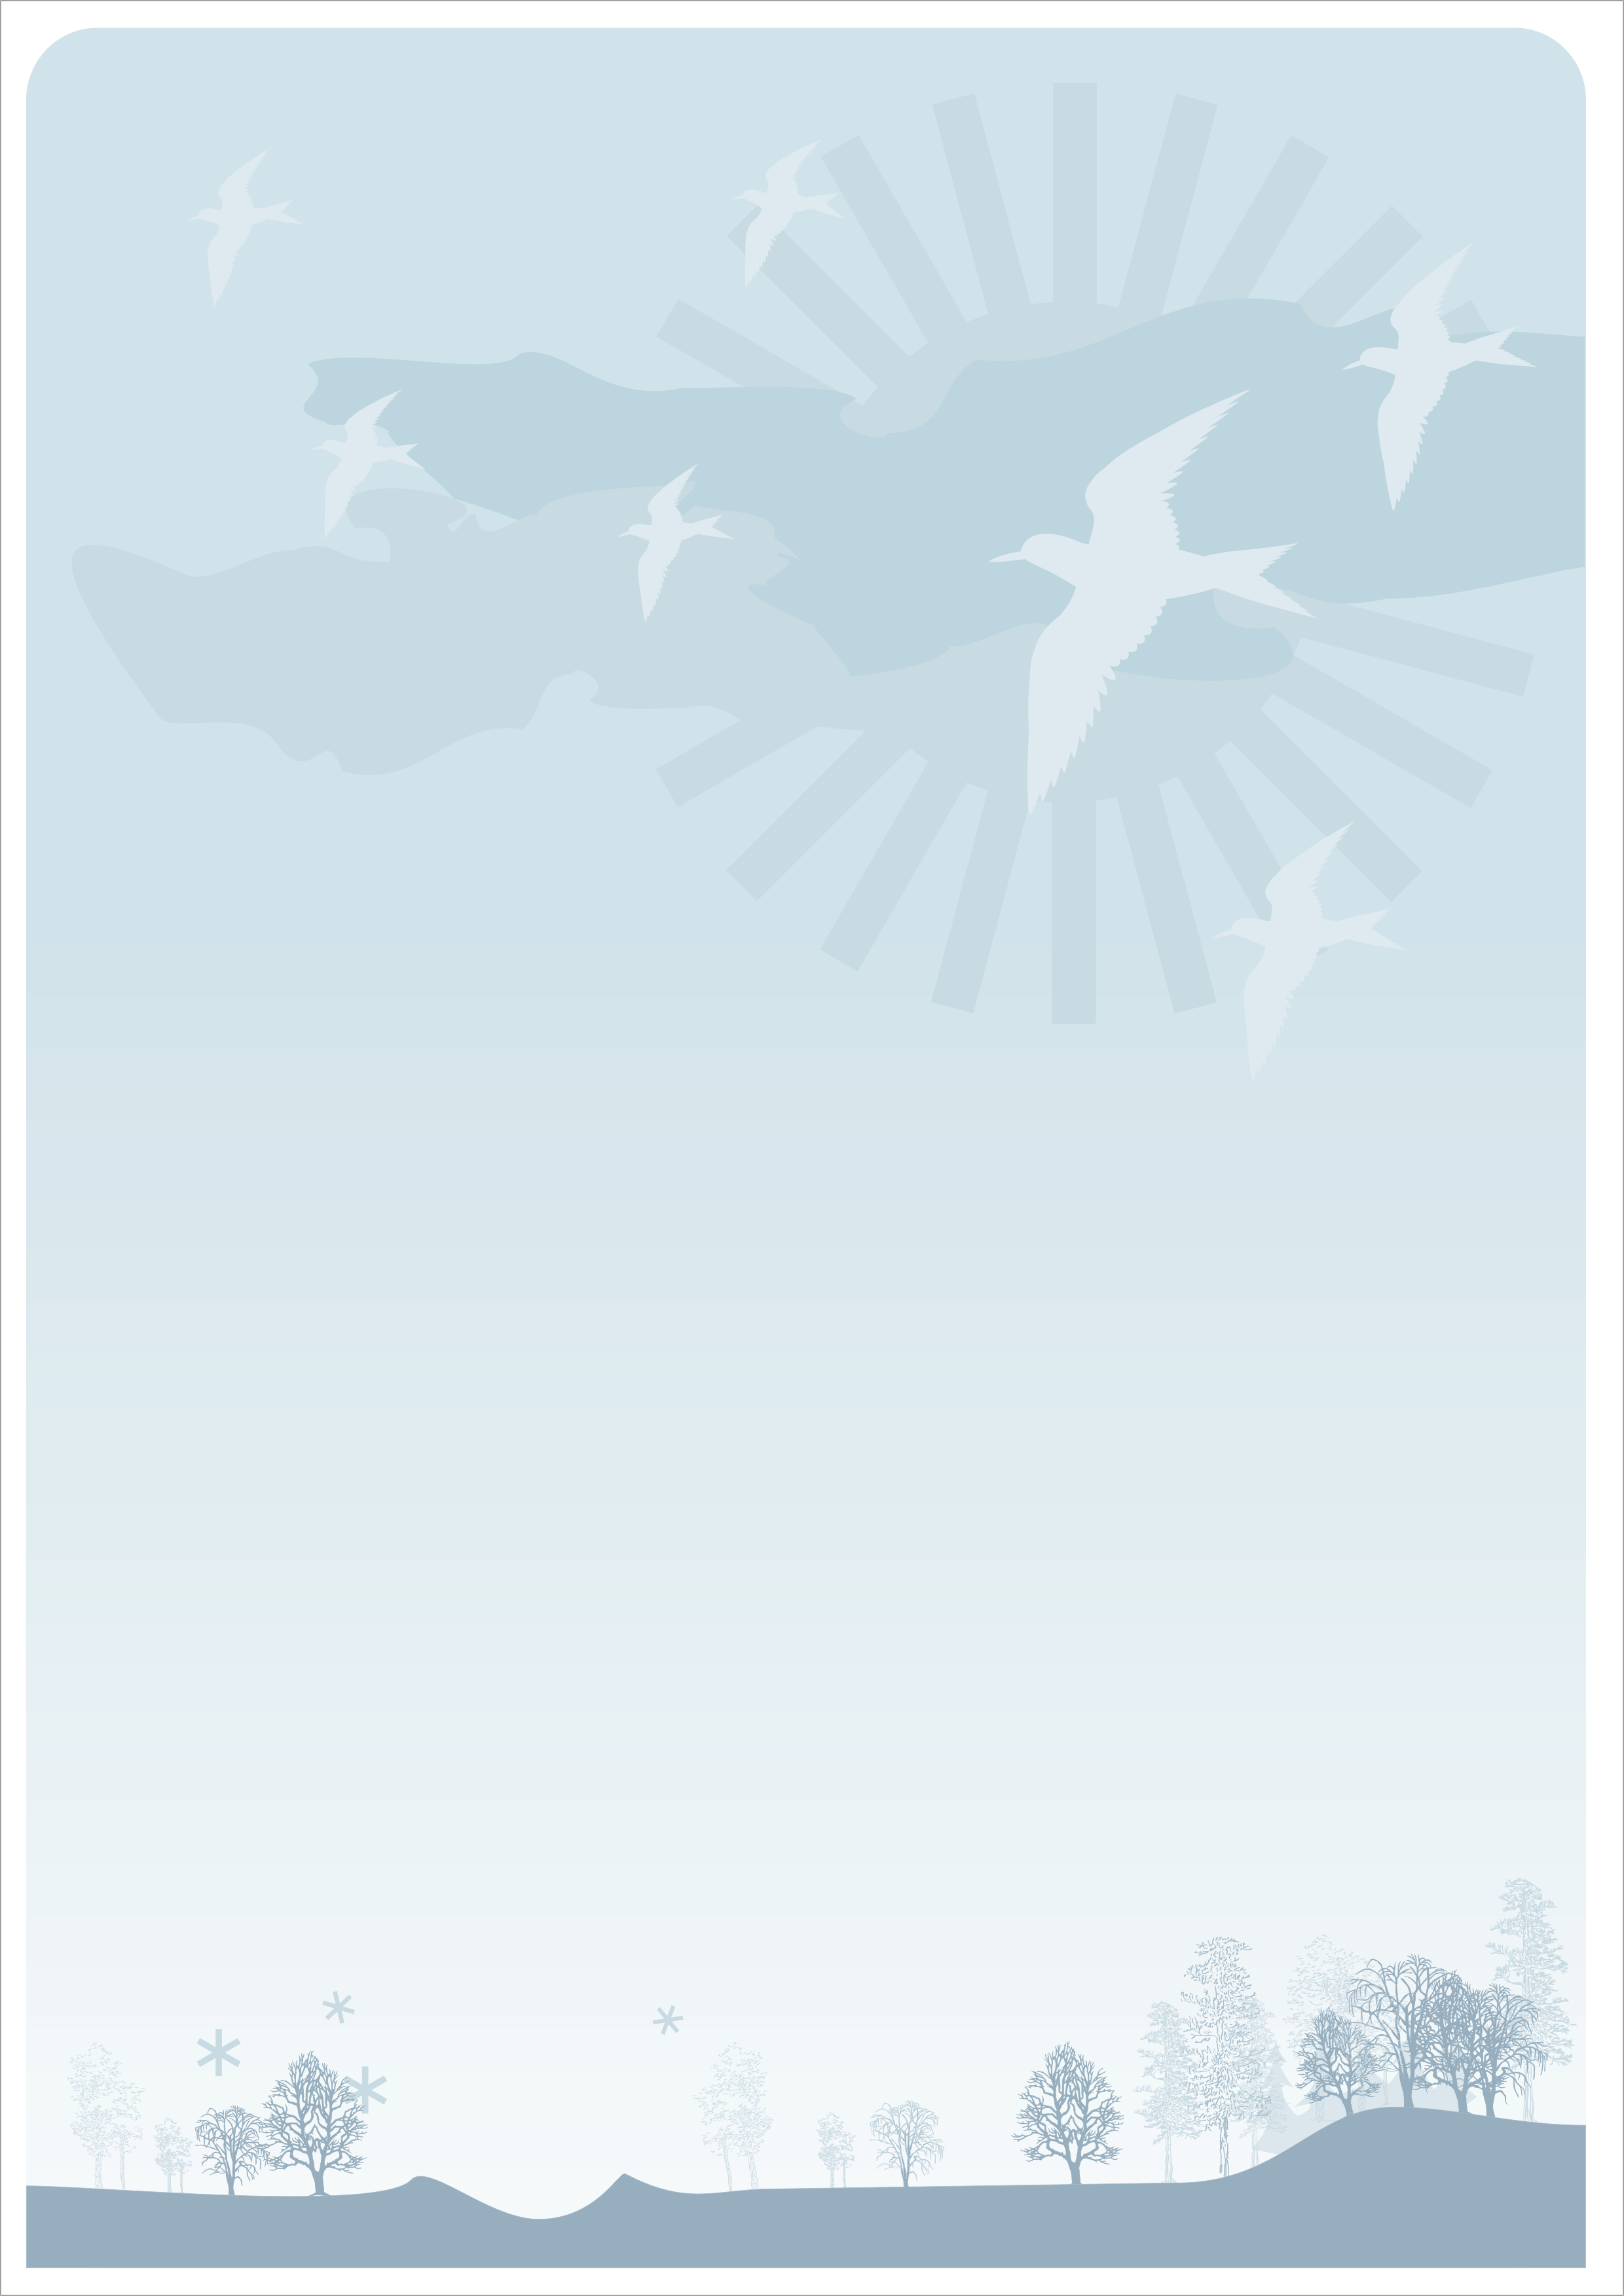 Letter Background Birds by leboef on